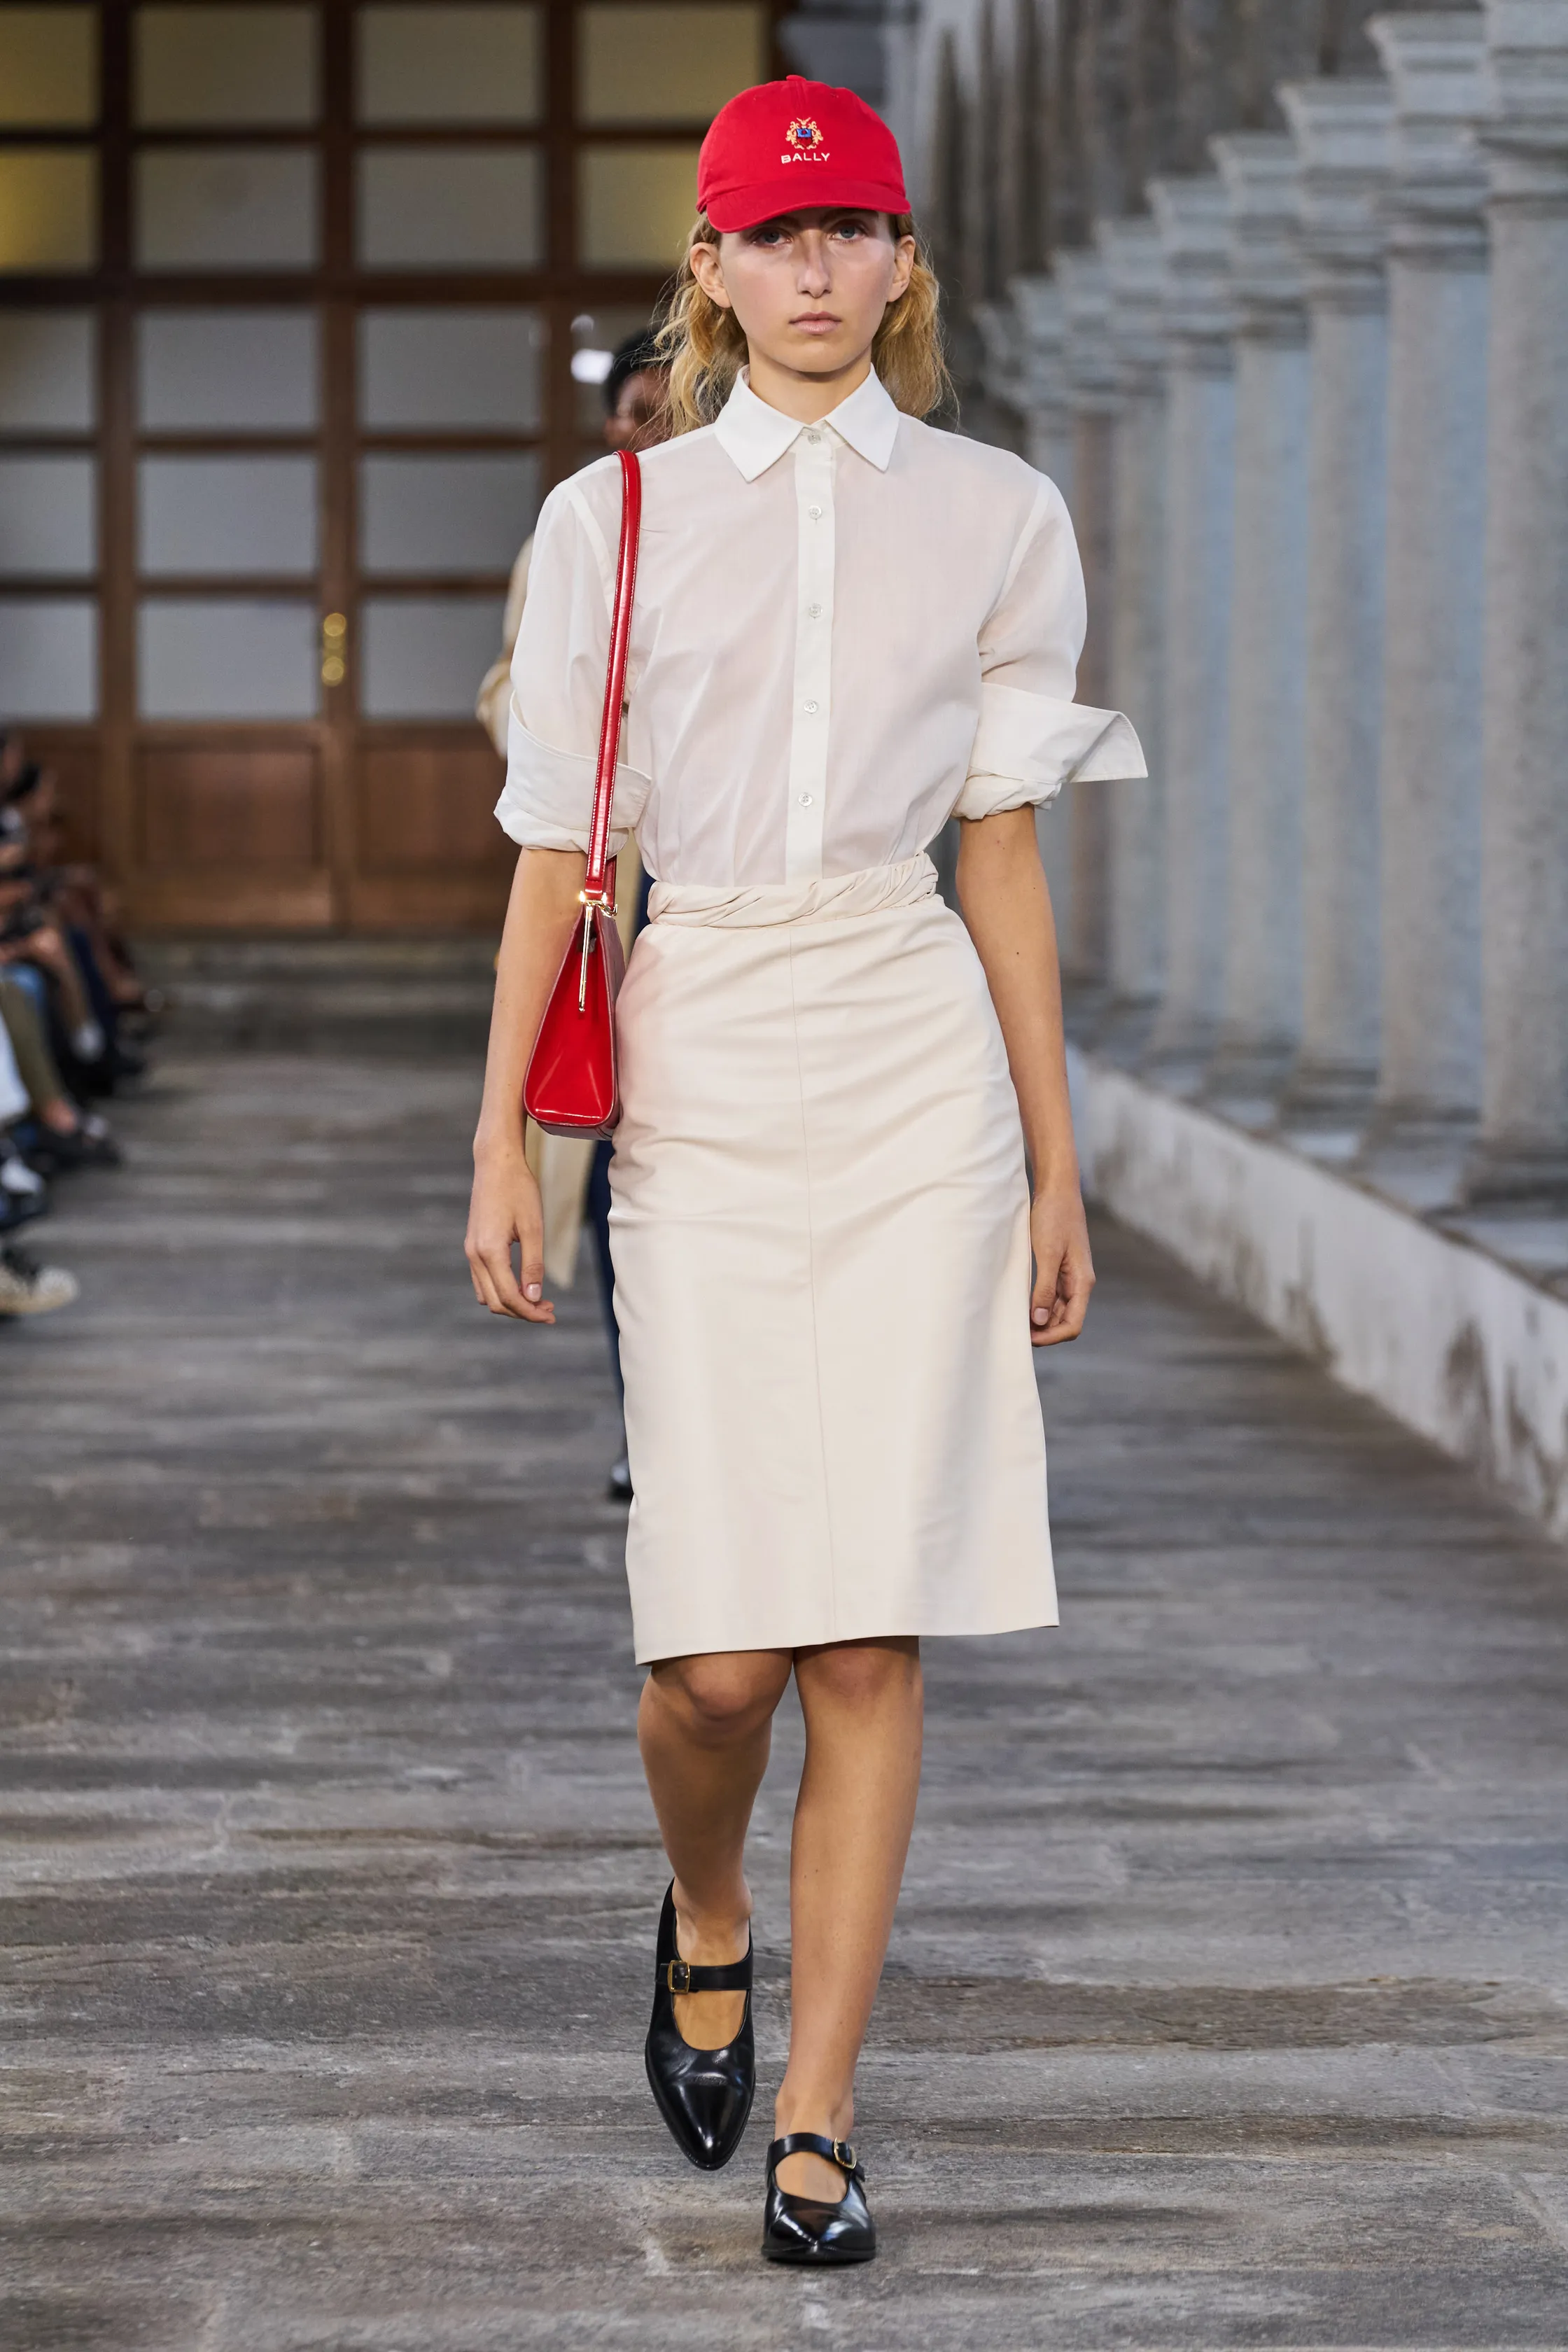 10 cute summer outfit ideas inspired by the runways